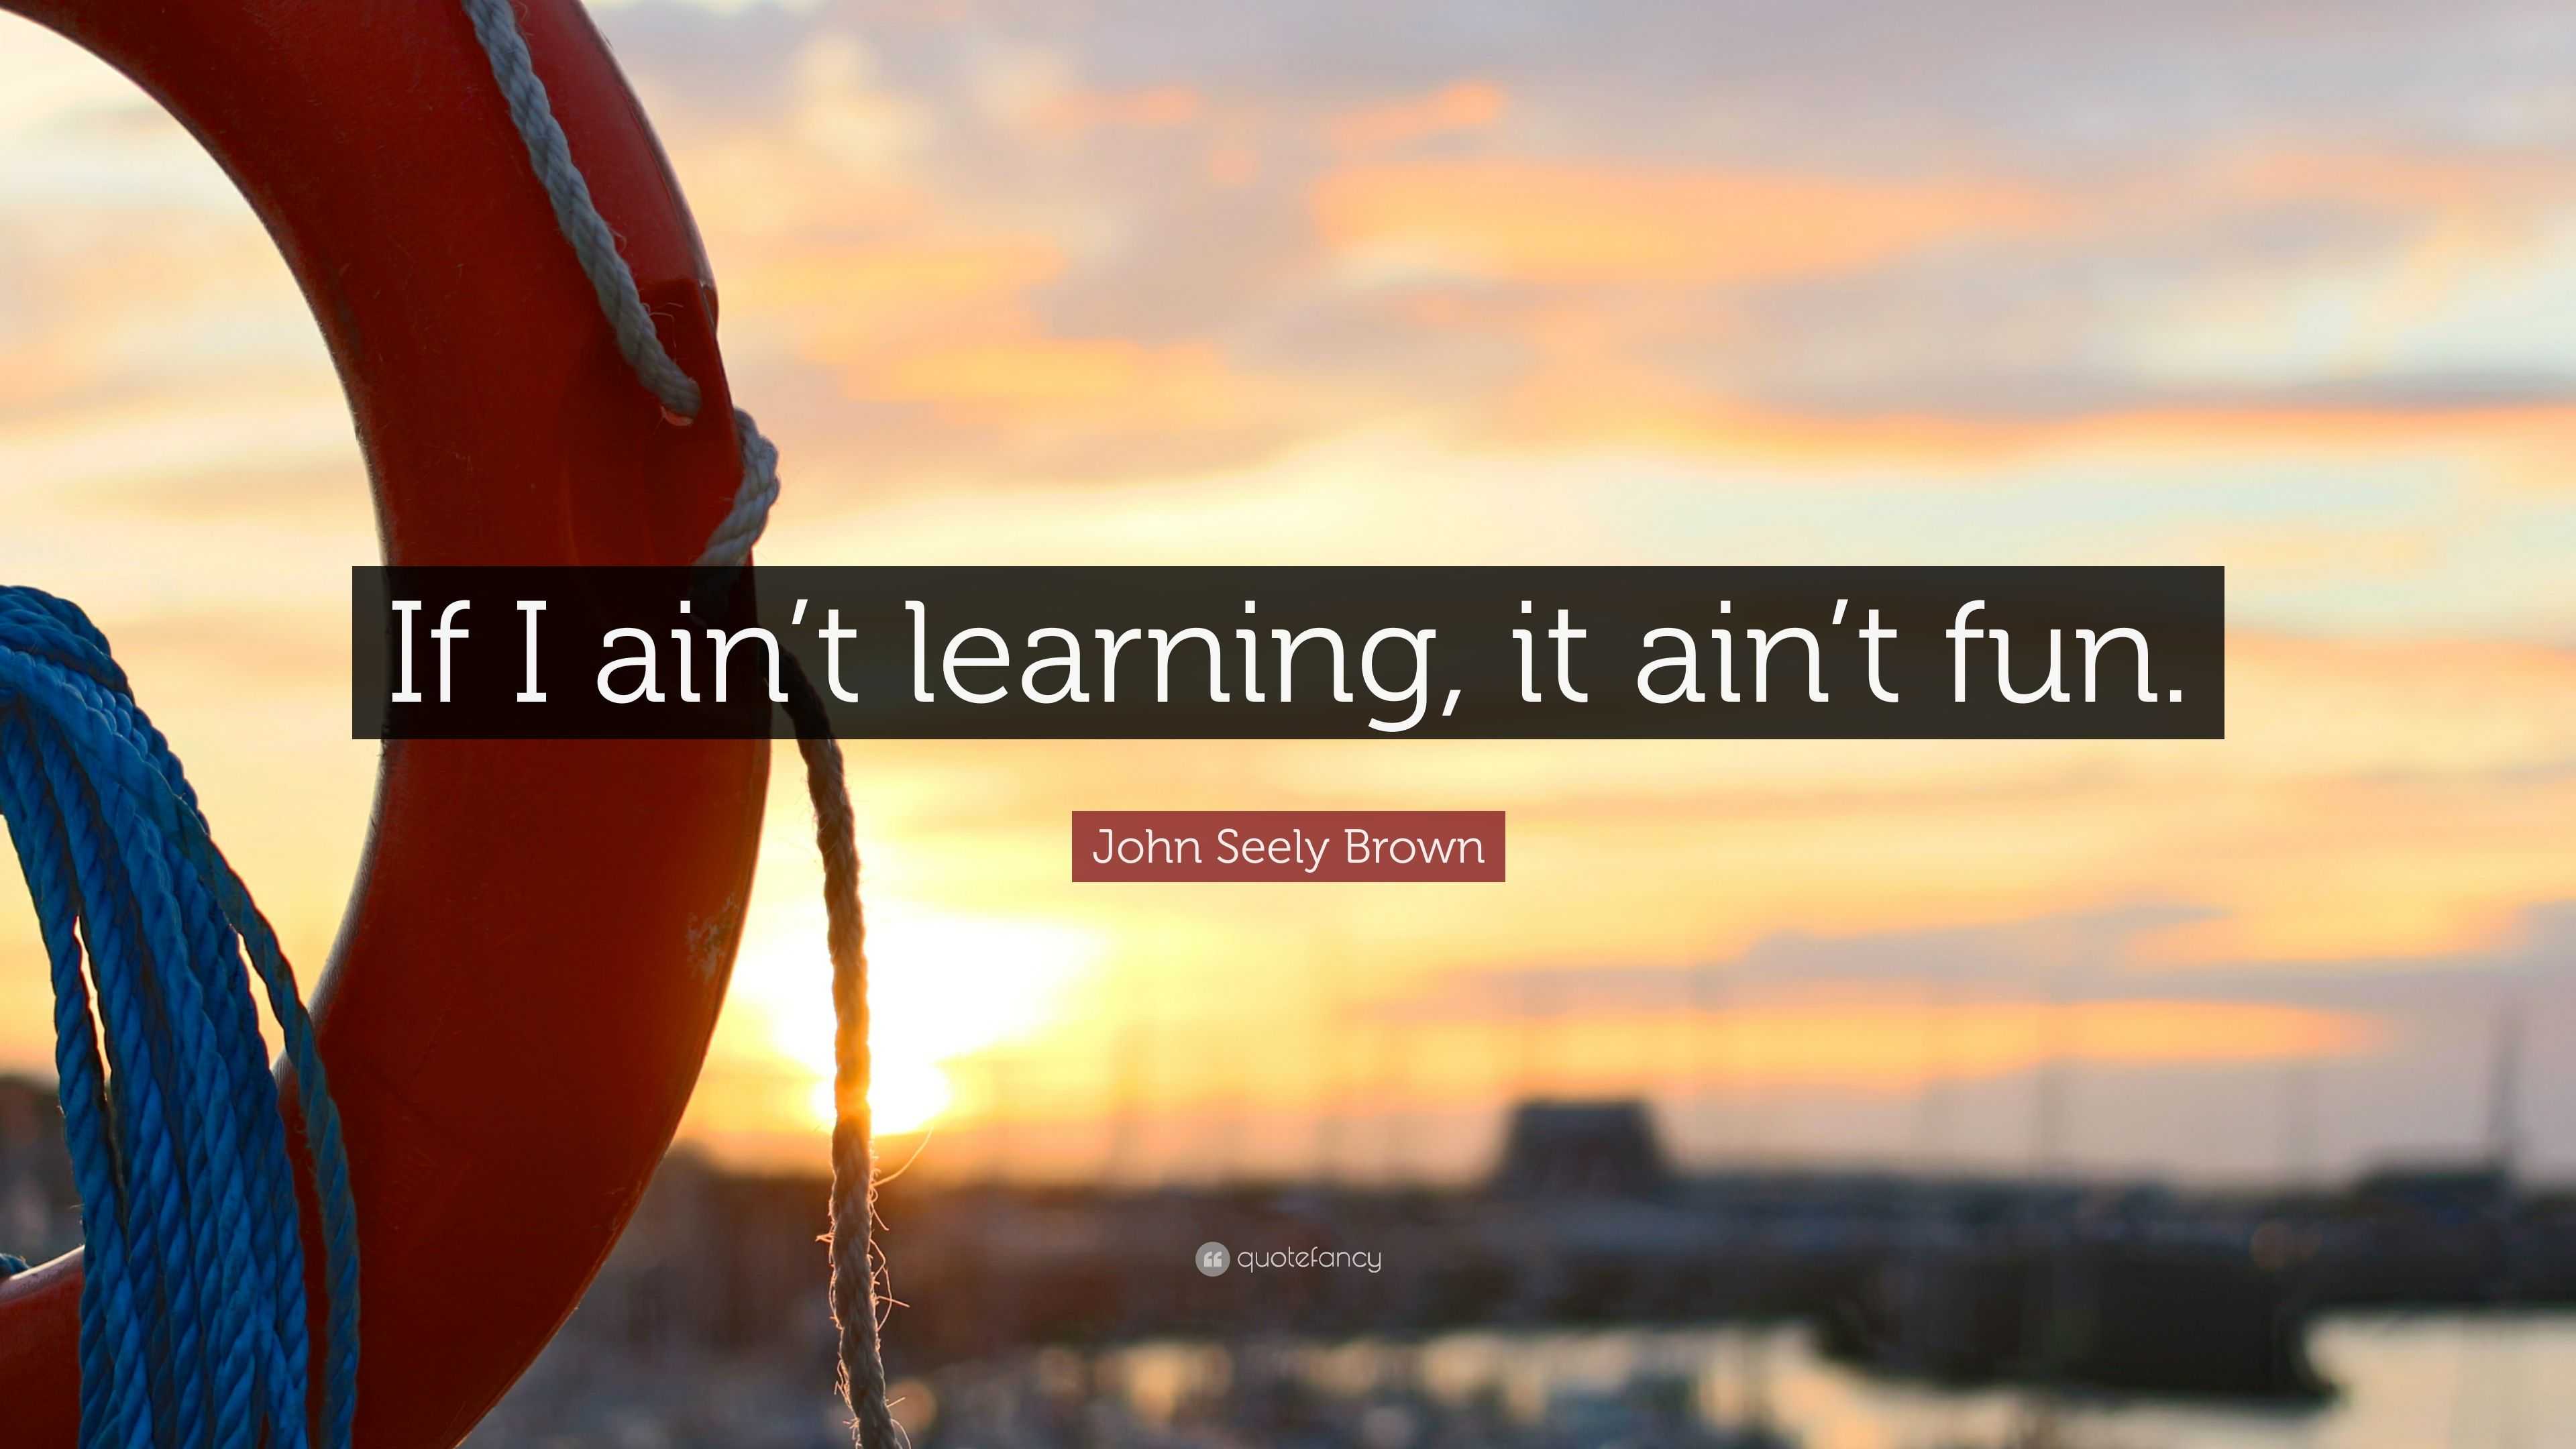 John Seely Brown Quote: “If I ain’t learning, it ain’t fun.”